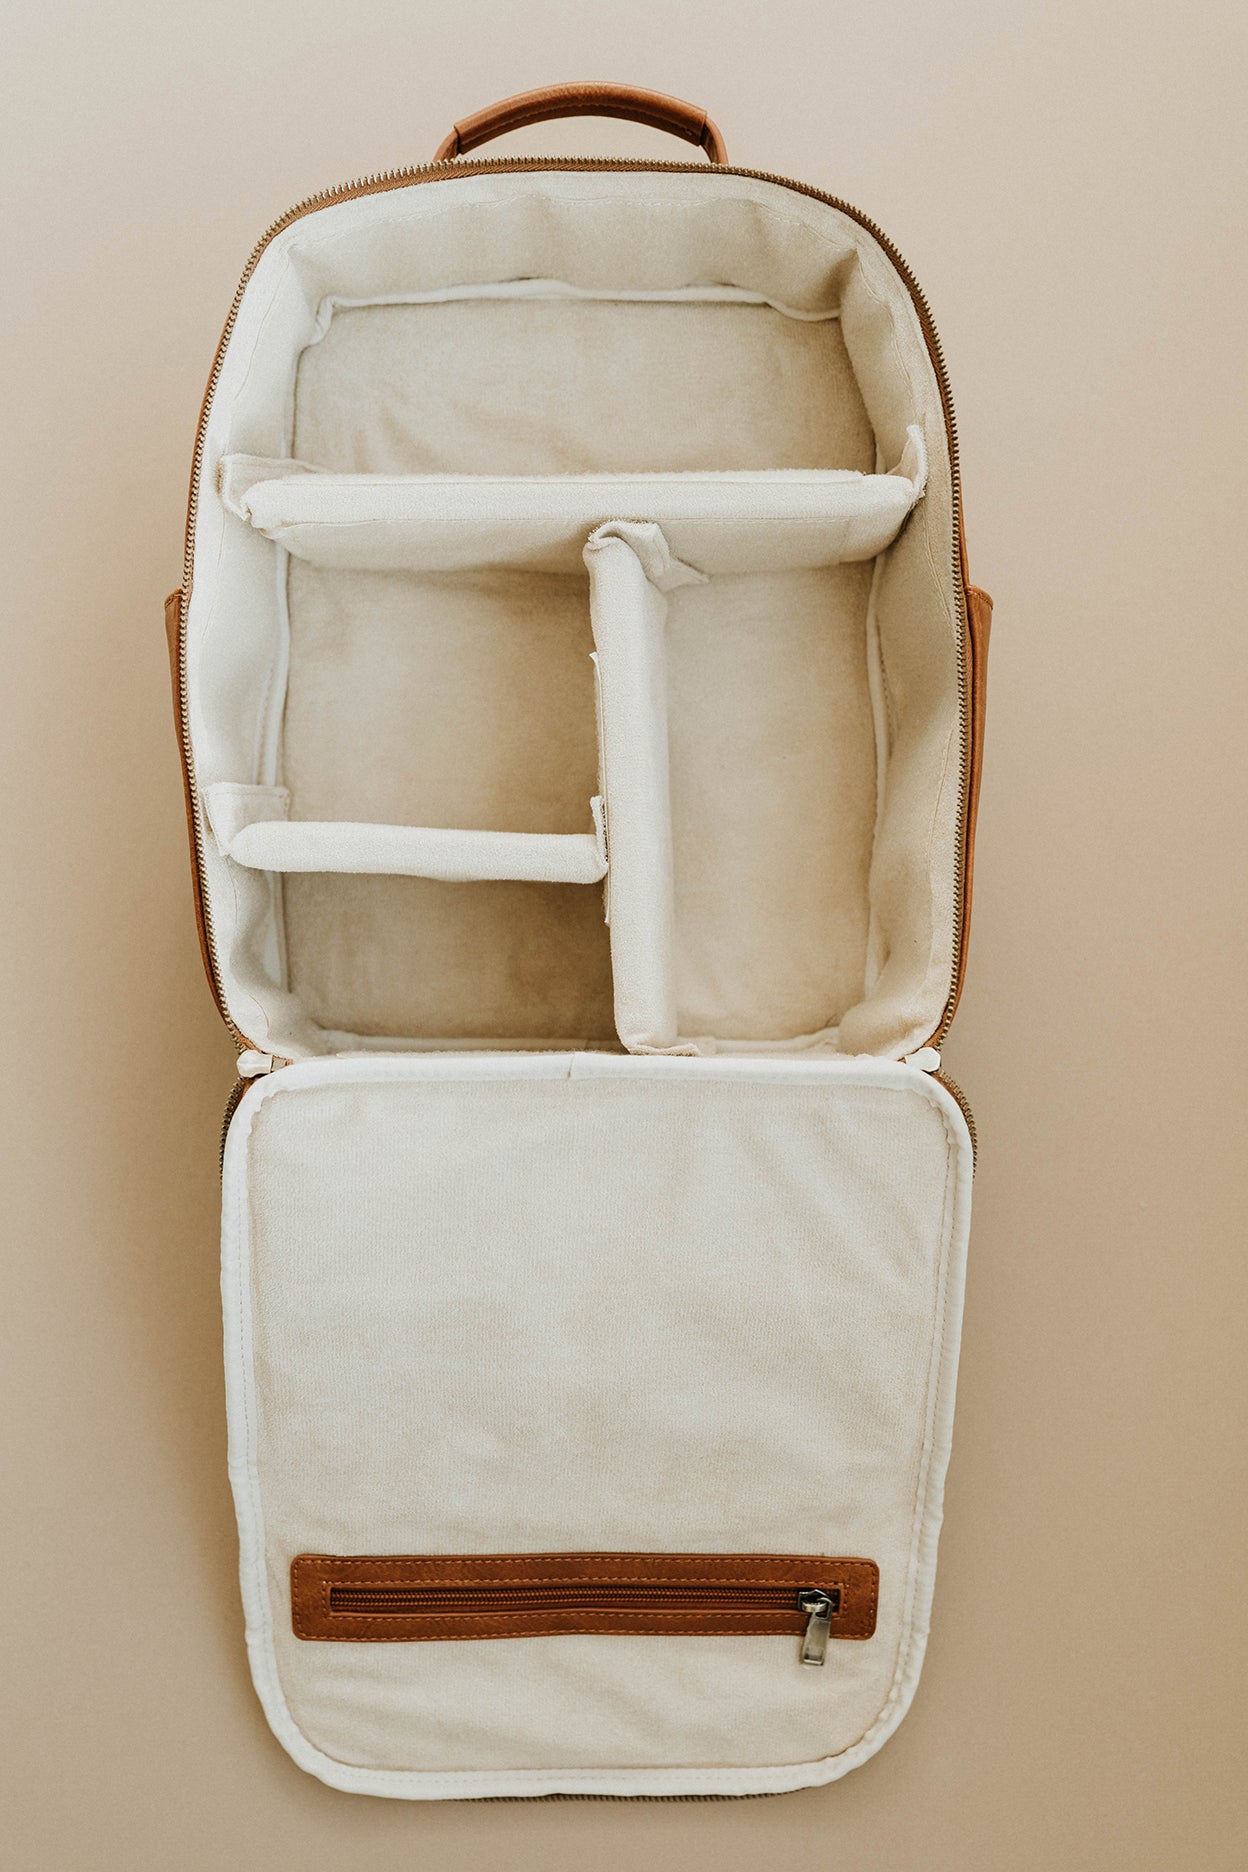 The Jenessa Midi- Our Mid-Size Camera Backpack